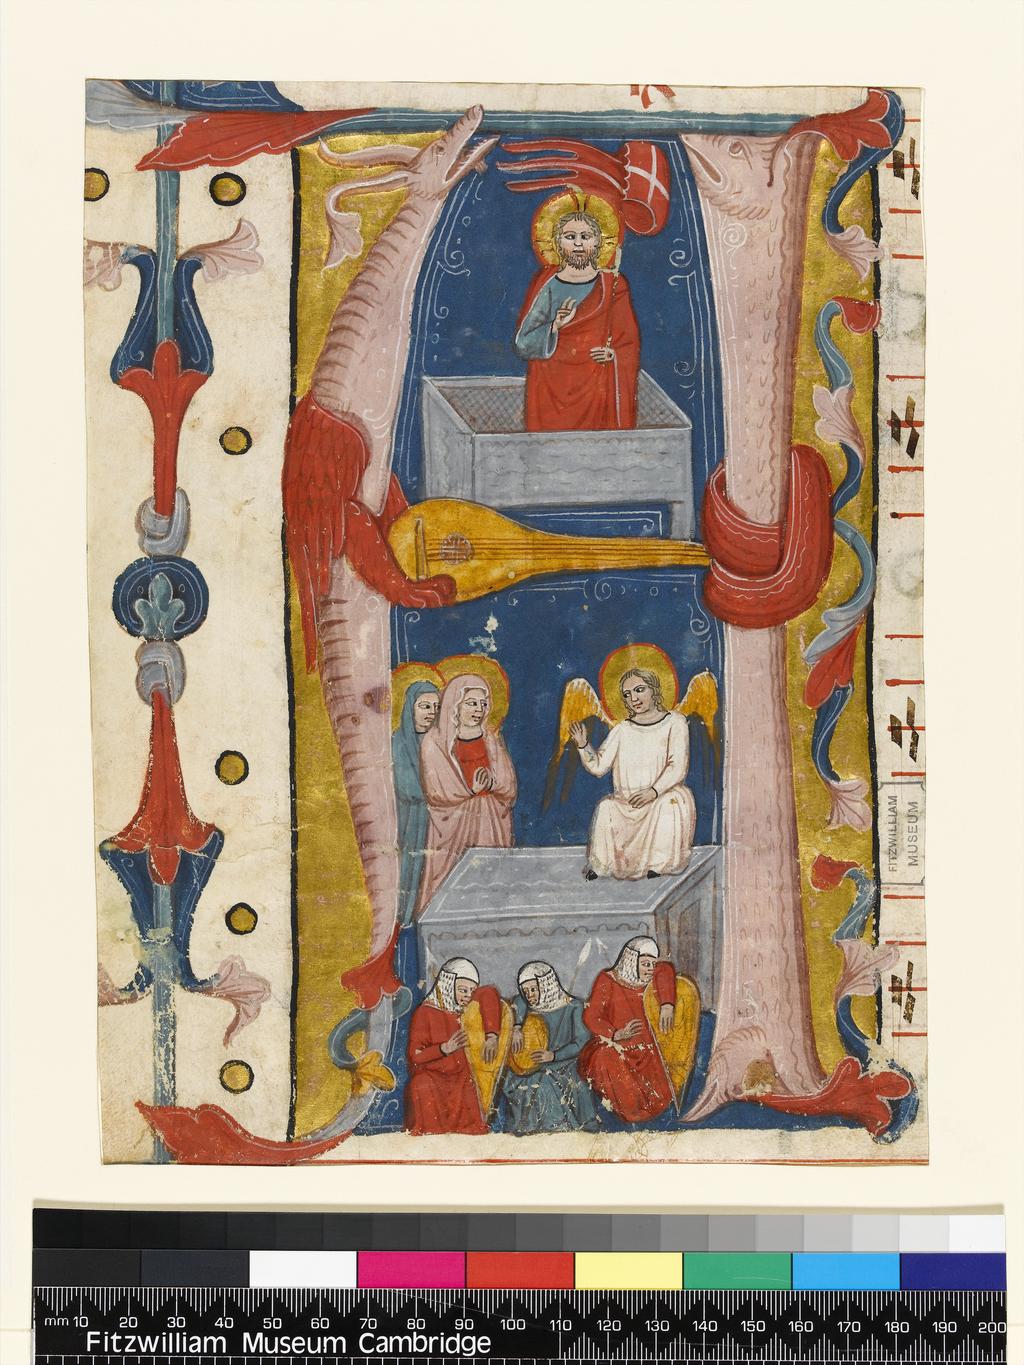 An image of Illuminated manuscript. Initial from an Antiphoner. Production Place: Central Italy. Parchment, gold, 226 x 174 mm, four musical staves ruled in red ink, four lines of fragmentary text ruled in plummet, circa 1350.CONTENTS: On reverse, the antiphons for the psalms of the first nocturn at Matins for Easter Sunday, [Postulavi patrem meum alleluia de]dit michi gentes [alleluia in here]ditatem alleluia … Evovae. A[ntiphona] Ego dor[mivi et somnu]m cepi et resurre[xi]; the initial introduced the responsory to the first lesson at Matins for Easter Sunday (Angelus domini descendit de celo), and would have been on the verso of the original leaf. DECORATION: Historiated initial, with staves formed of an elongated dragon and fish, and cross-bar formed of a stringed instrument, on a ground of solid gold with acanthus motifs extending to form border in margin: [A] The Resurrection, in the lower compartment, the angel appears to two Marys while the soldiers sleep, in the upper compartment, Christ stands triumphant in the empty tomb. ORNAMENTATION: on reverse, one red initial with brown pen flourishing, height of width between staves.